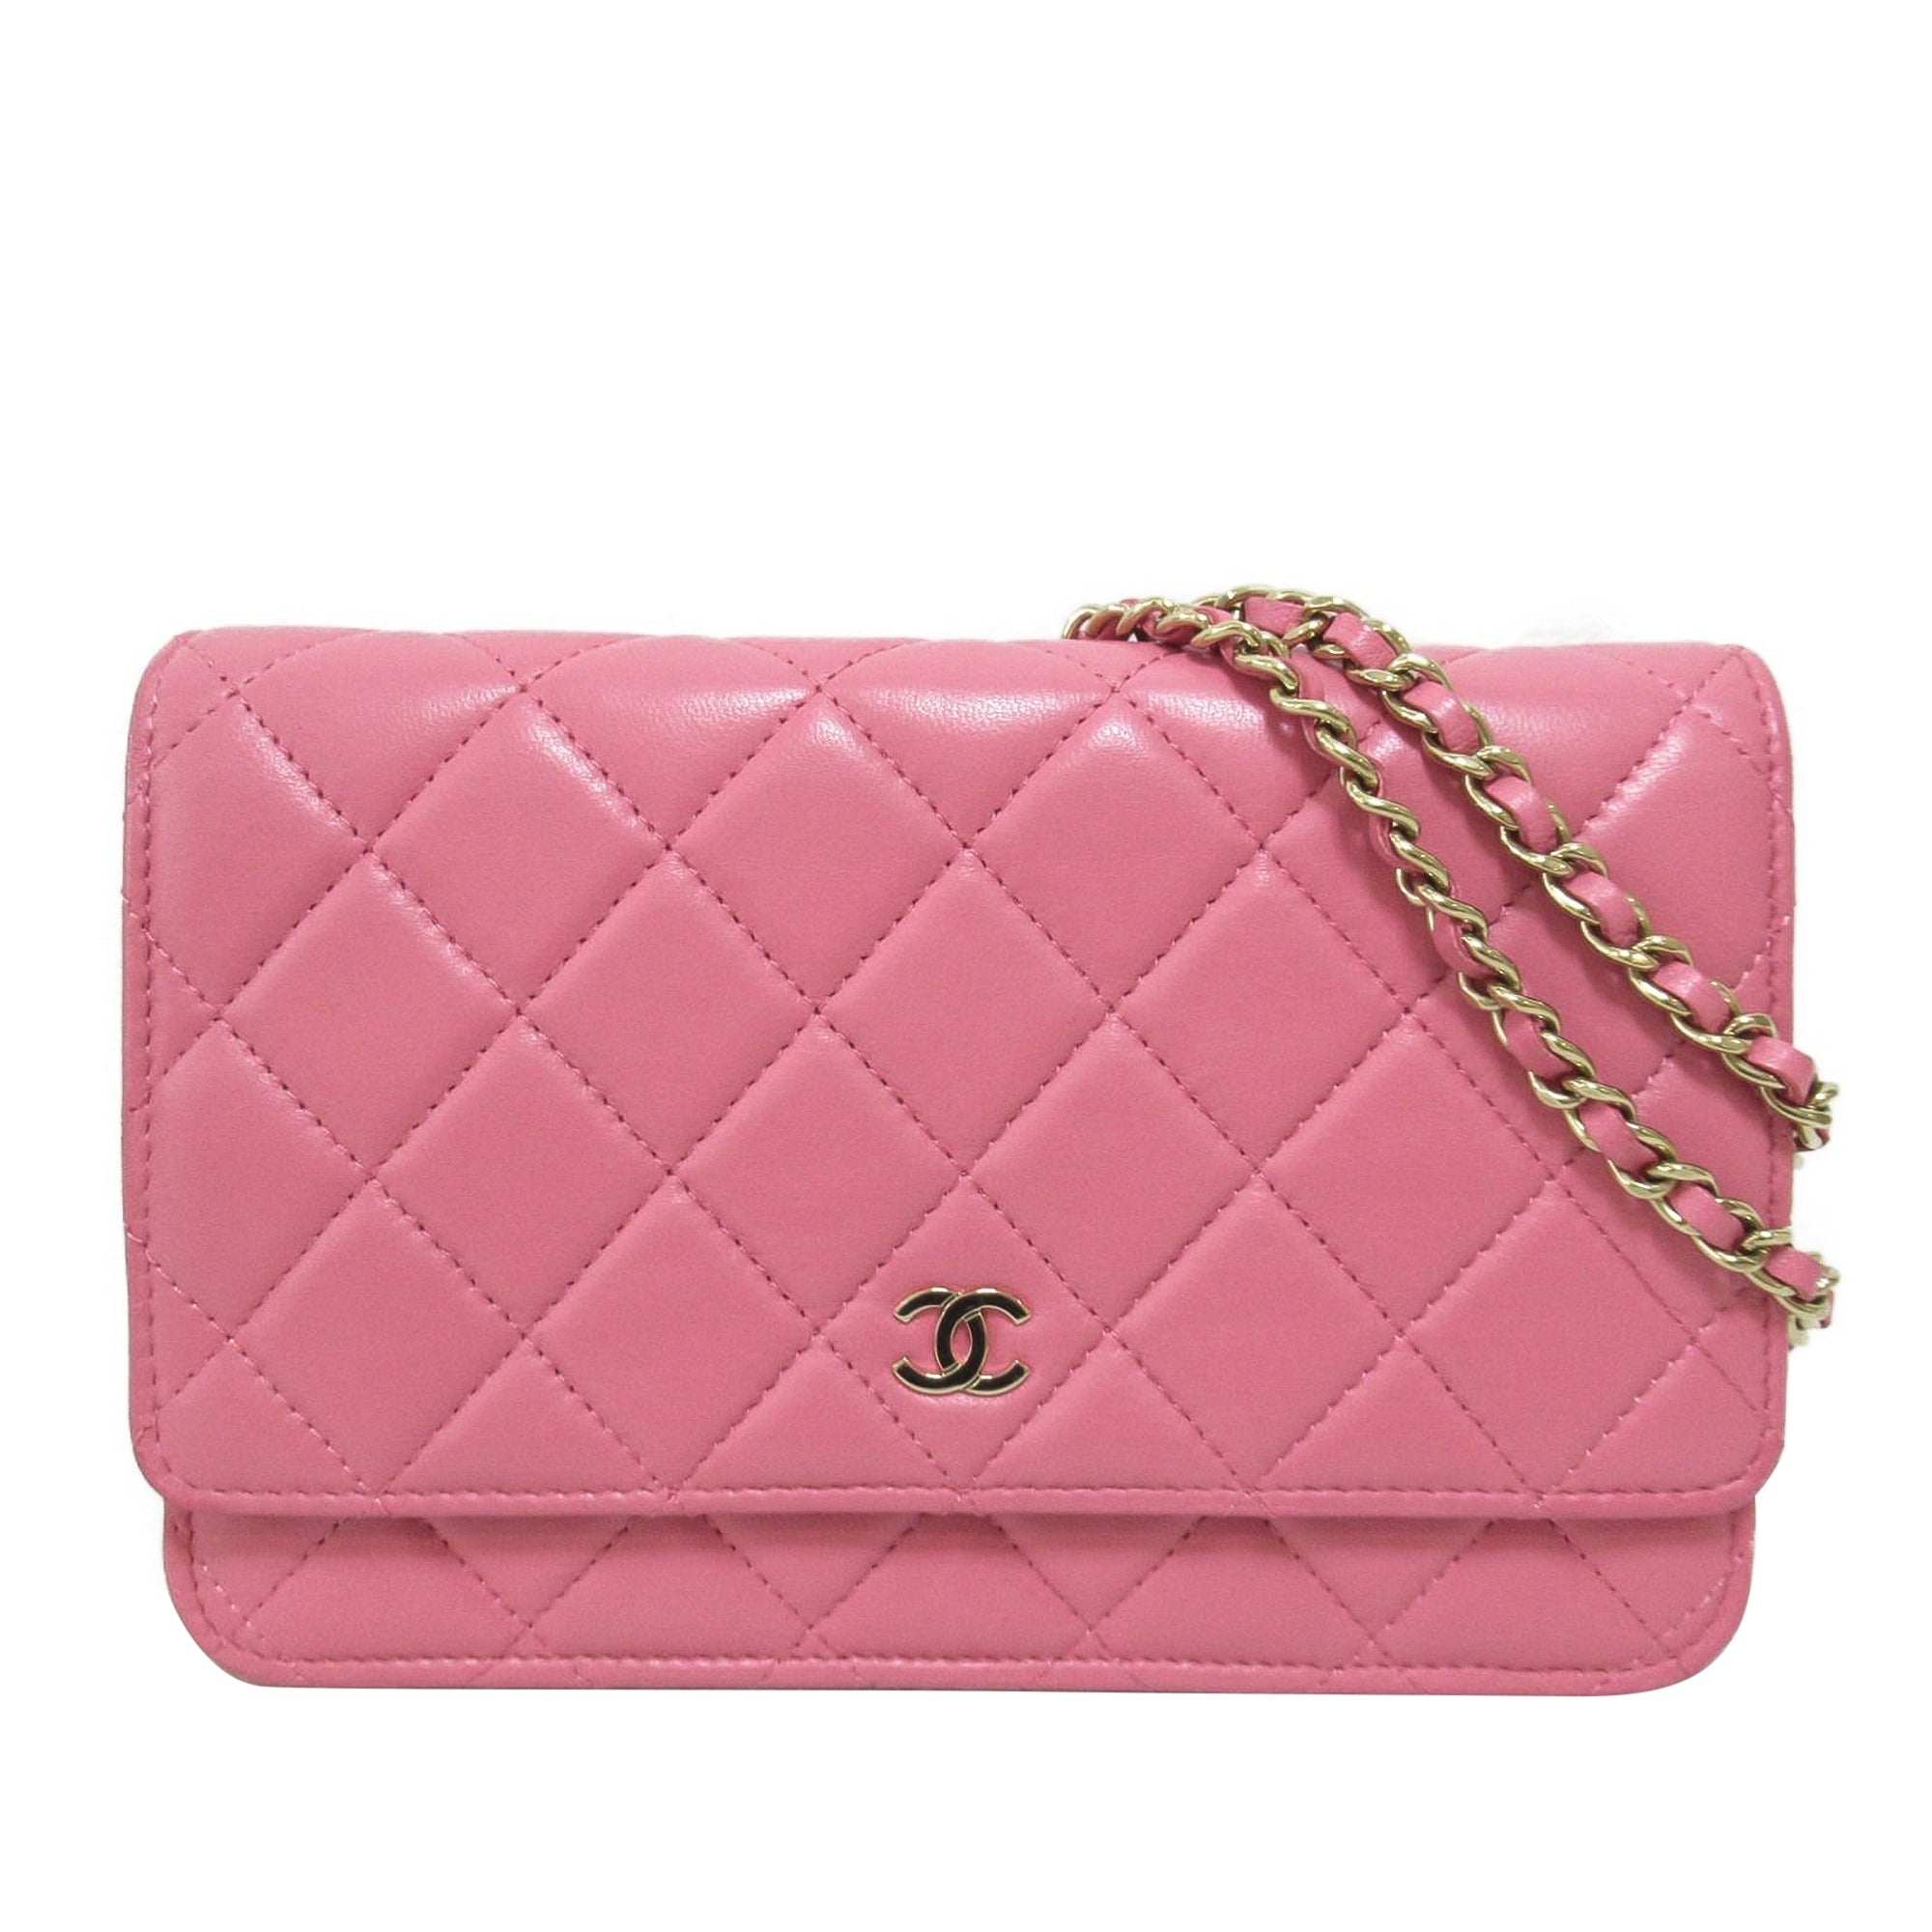 CHANEL Lambskin Quilted Chanel 19 Wallet On Chain WOC Light Purple 830386